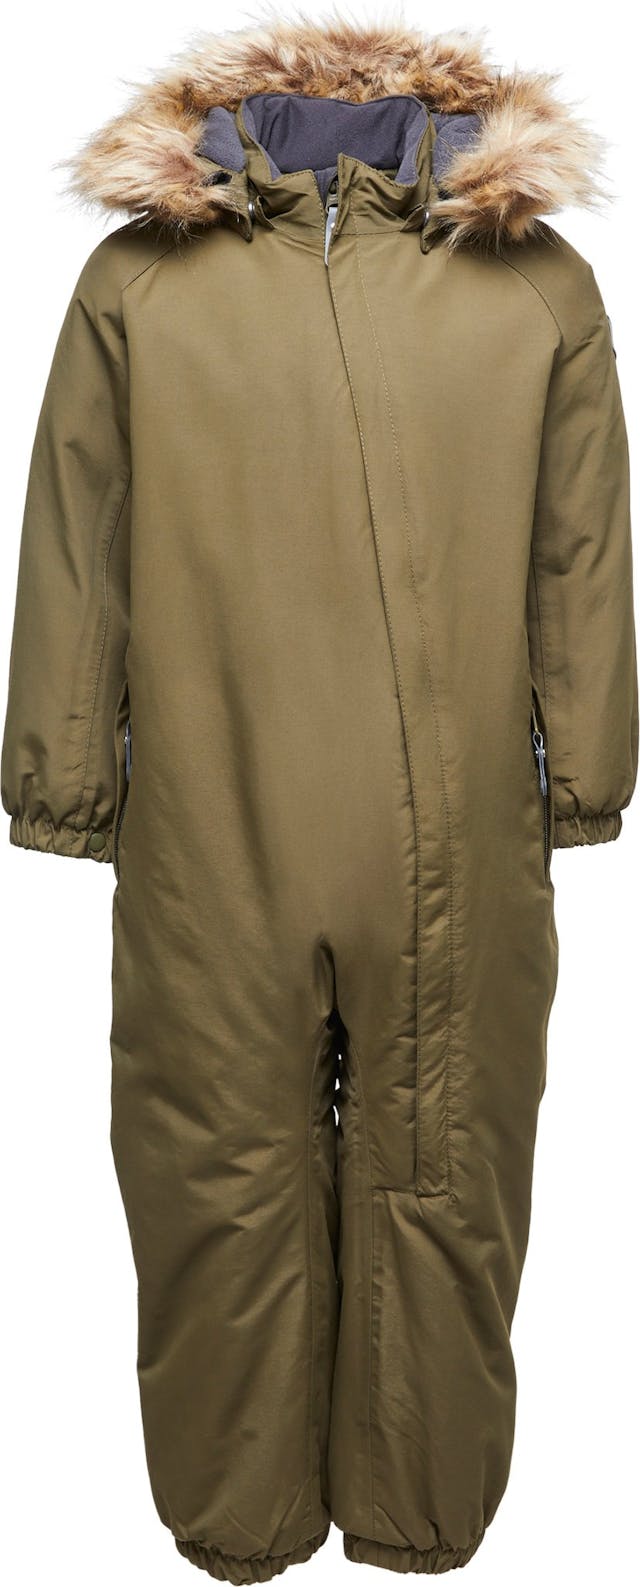 Product image for Faux Fur Coveralls - Baby